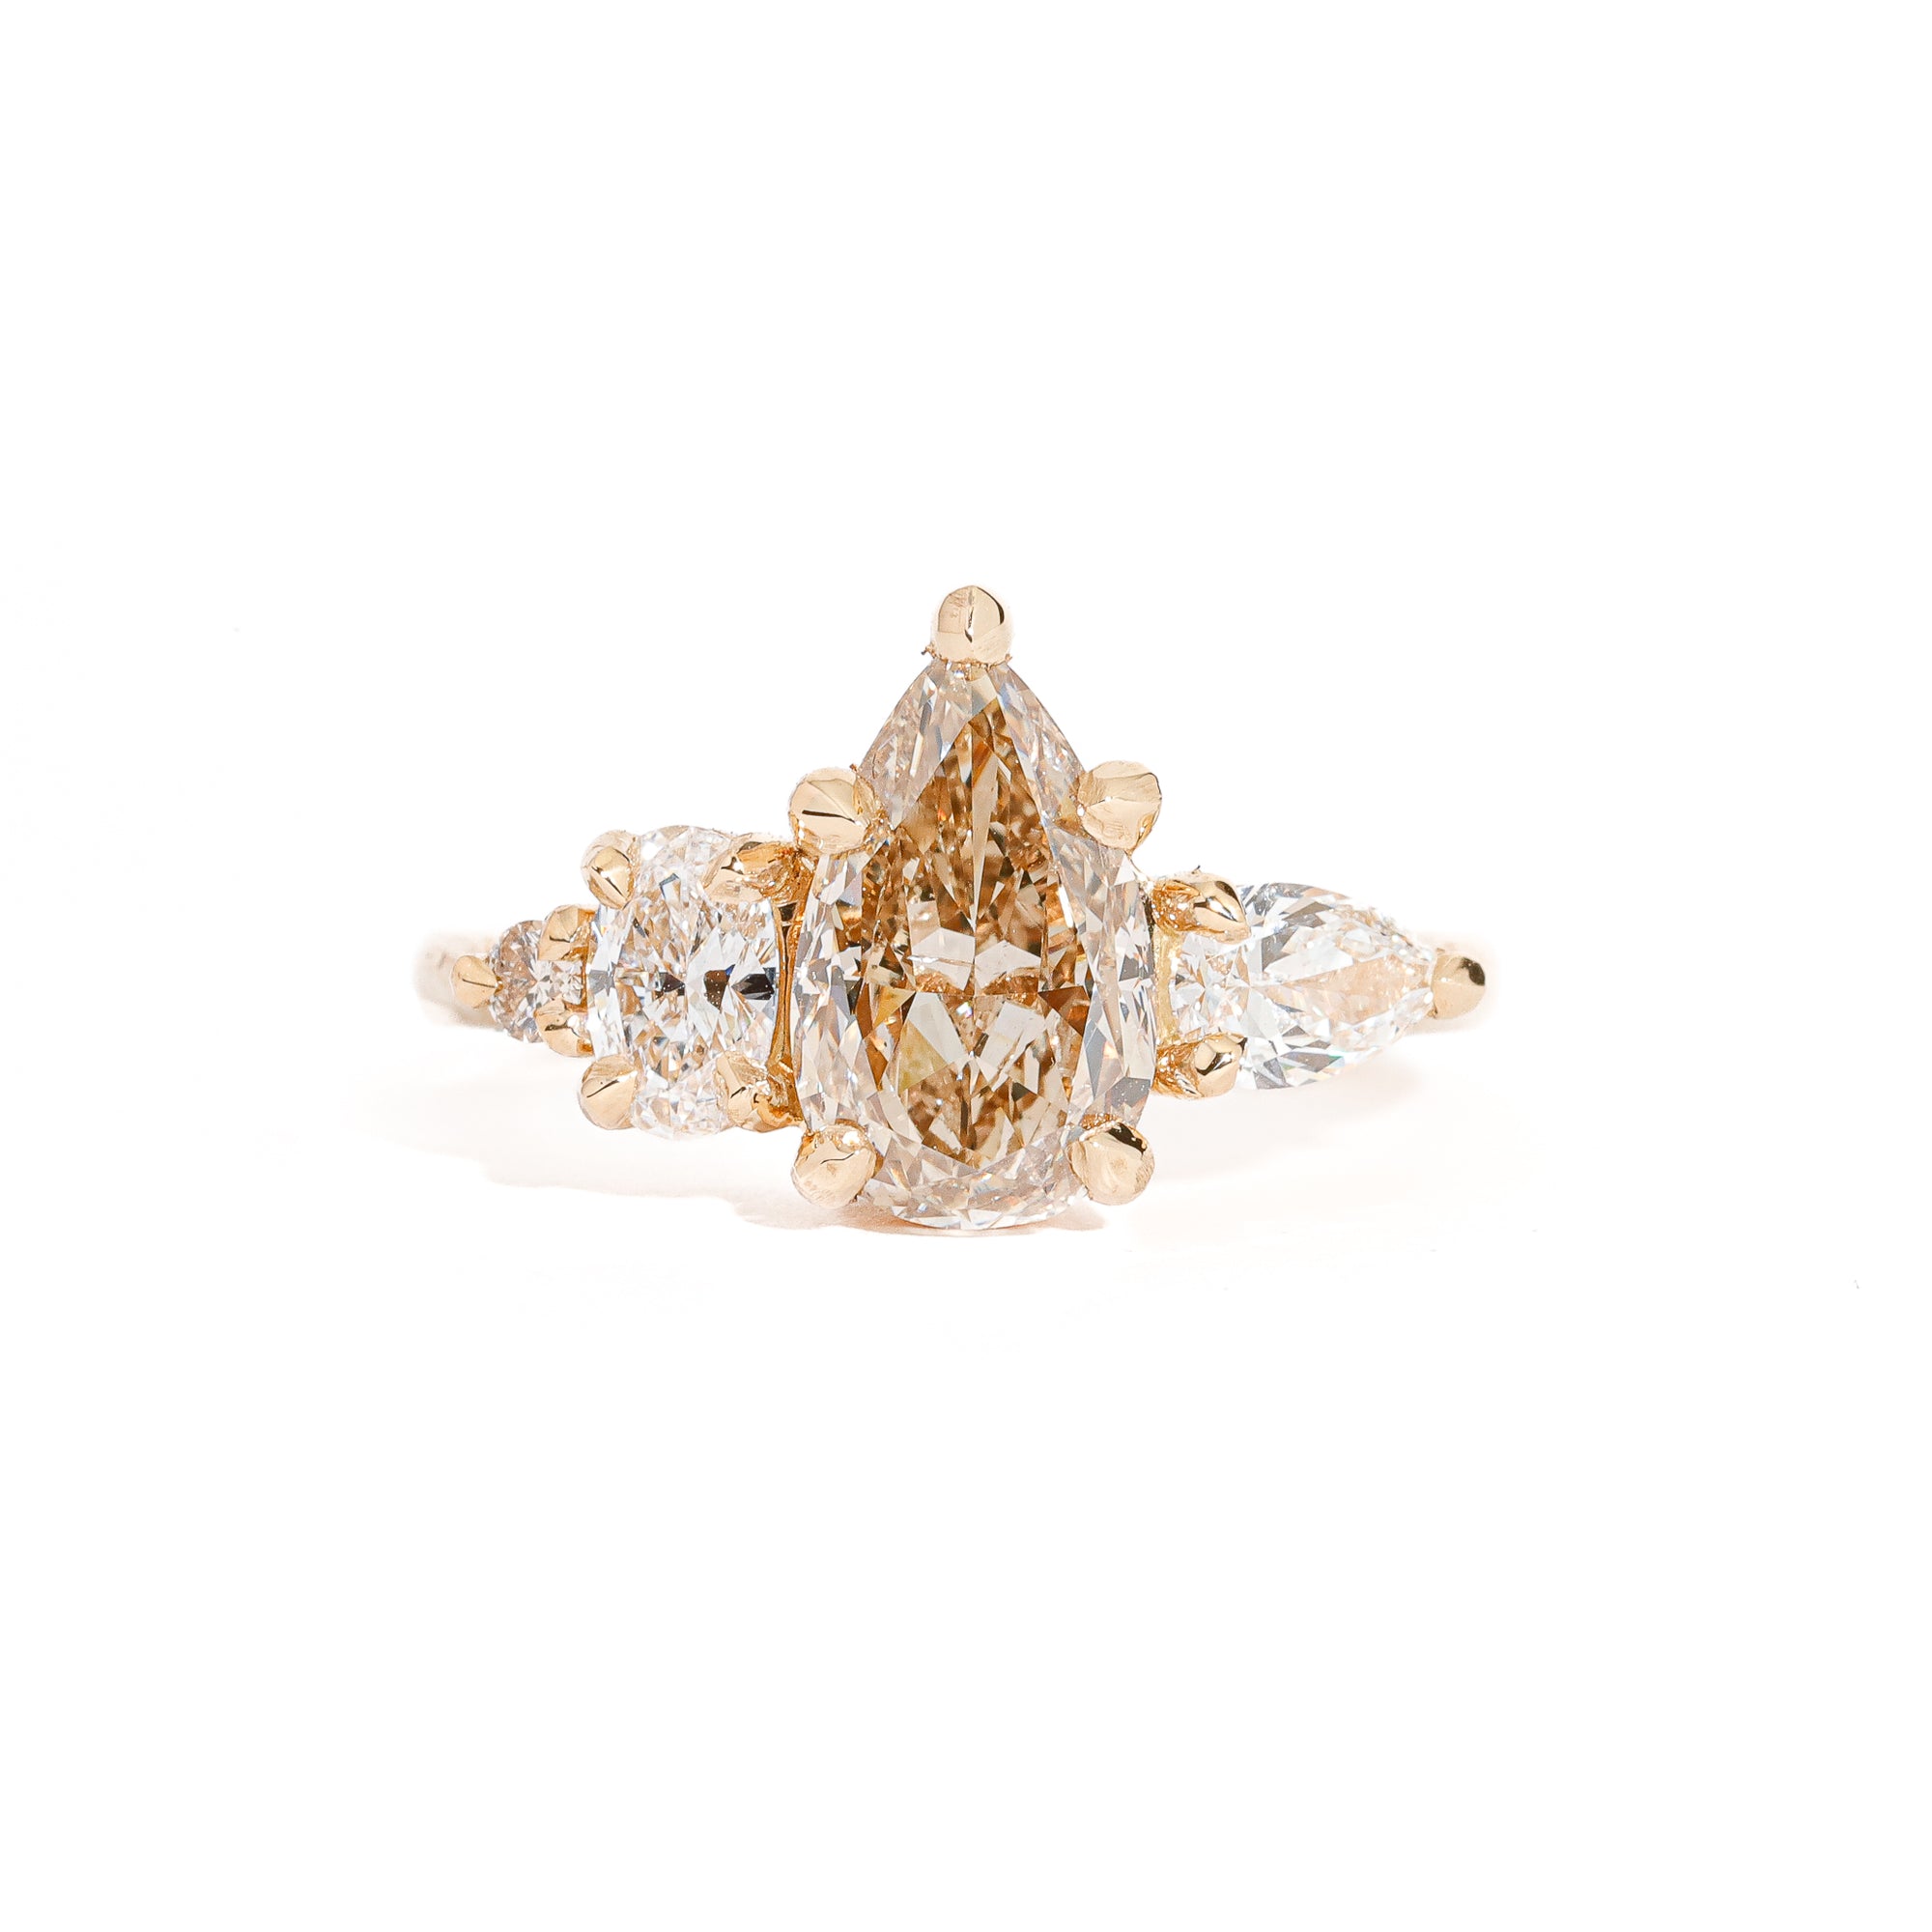 Pear Cut Champagne Diamond with Pear and Round Brilliant Cut White Diamond Side Stones in 18 Carat Yellow Gold